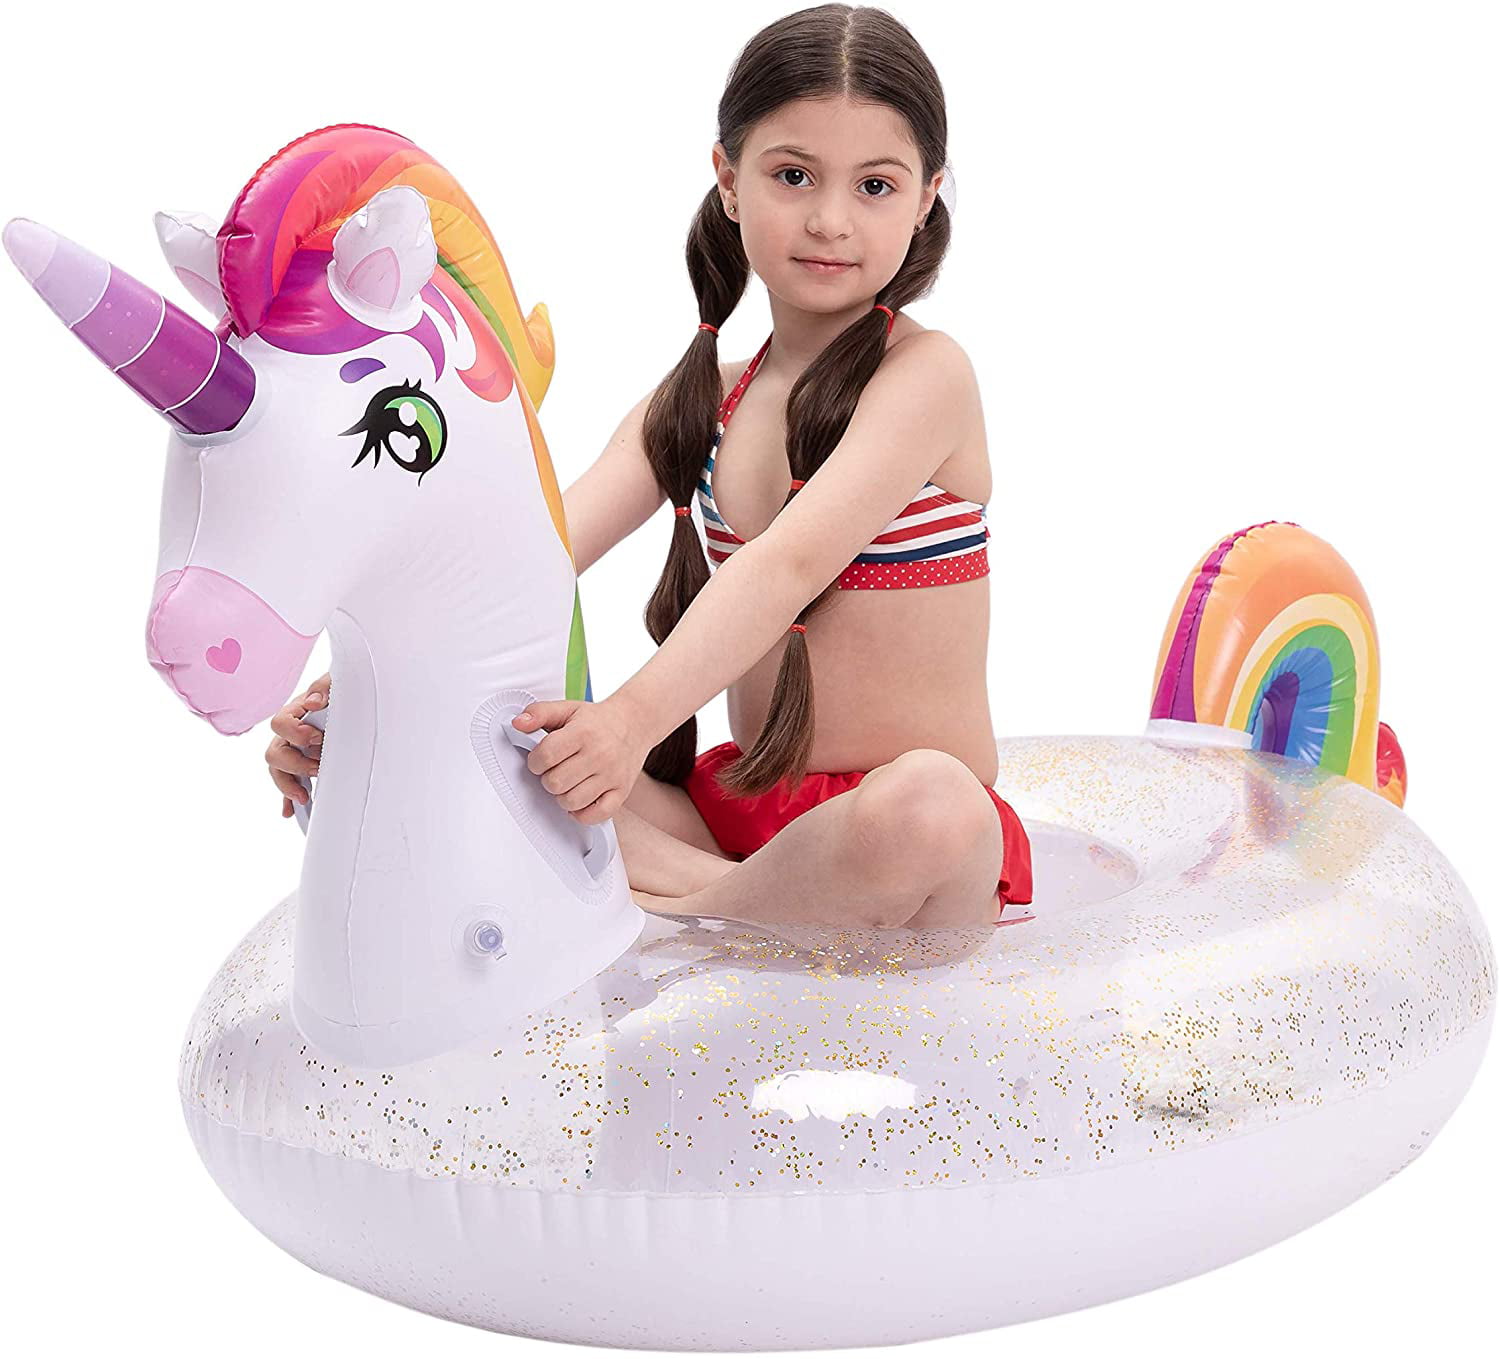 Details about   Inflatable Unicorn Island Big New Sun Pleasure 6 Person Party w/Free Pump 